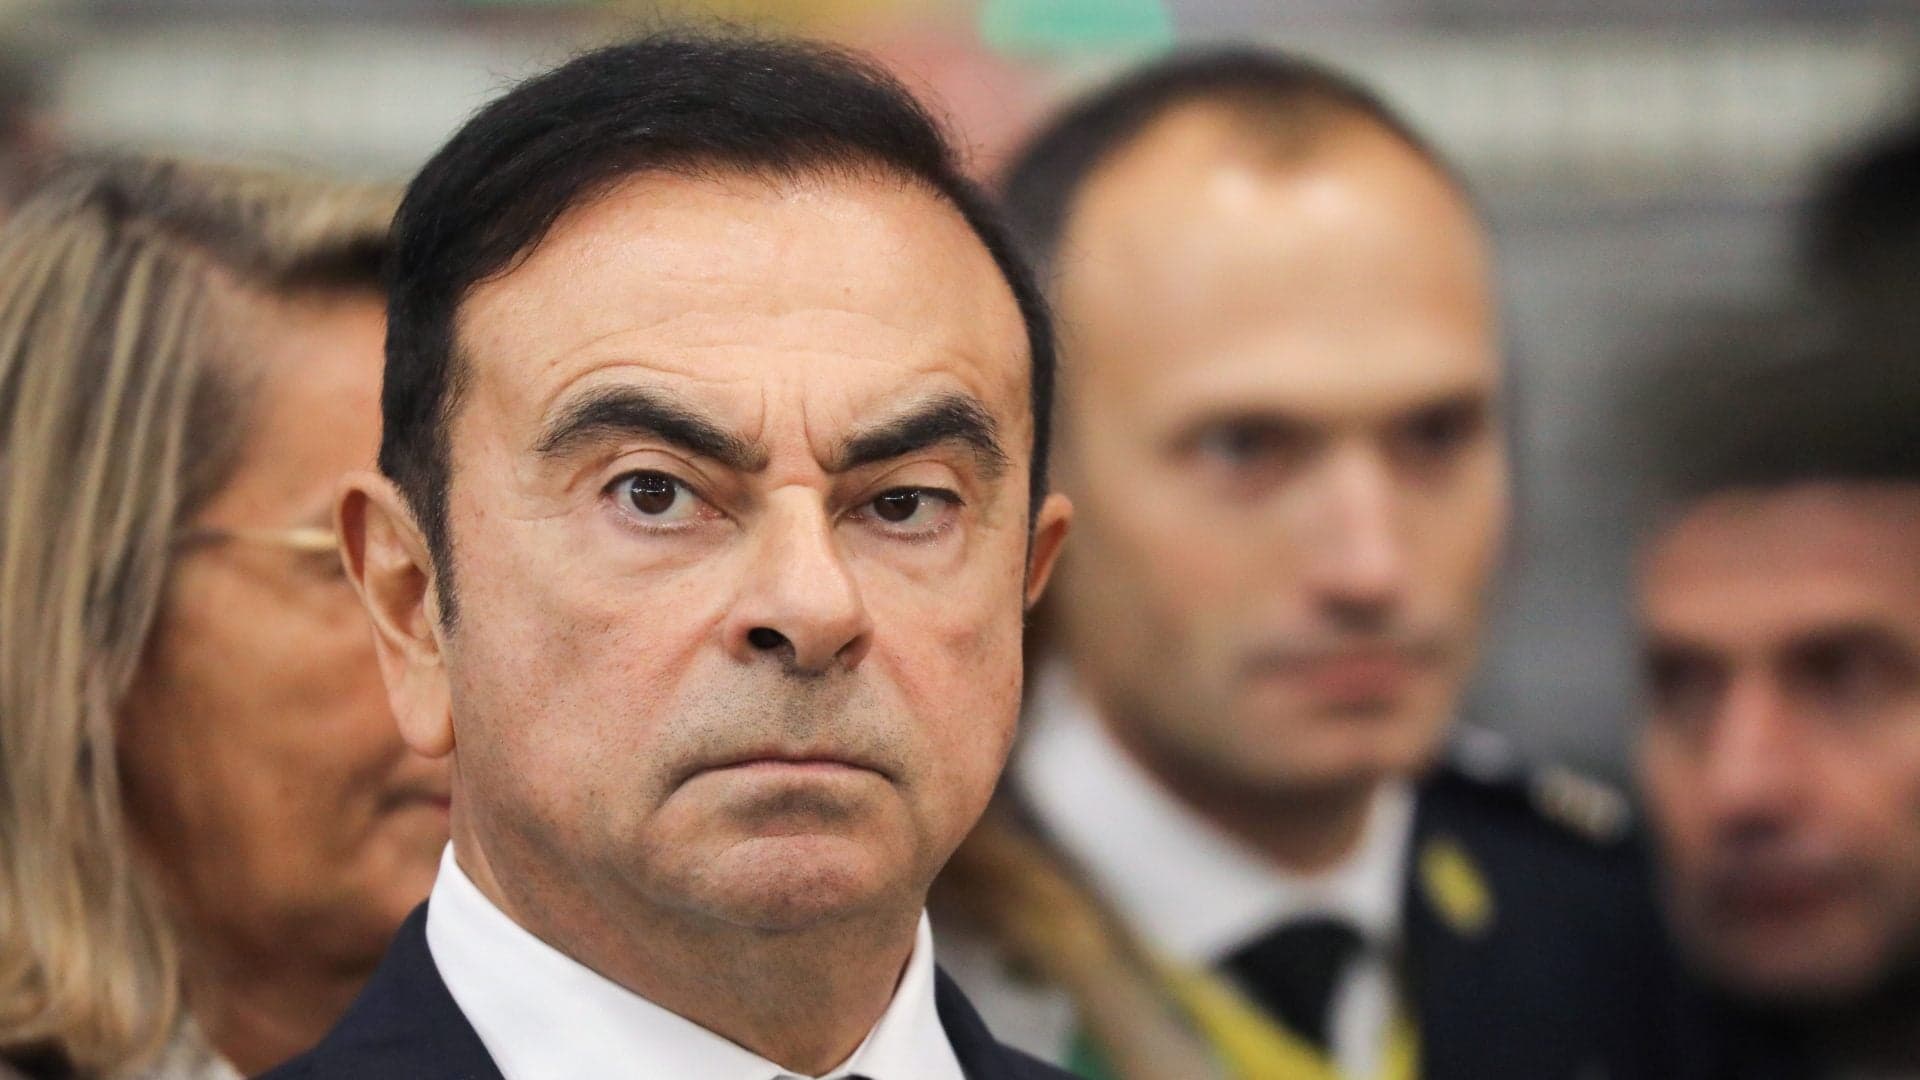 Carole Ghosn Claims Embattled Husband, Carlos Ghosn, Is Innocent